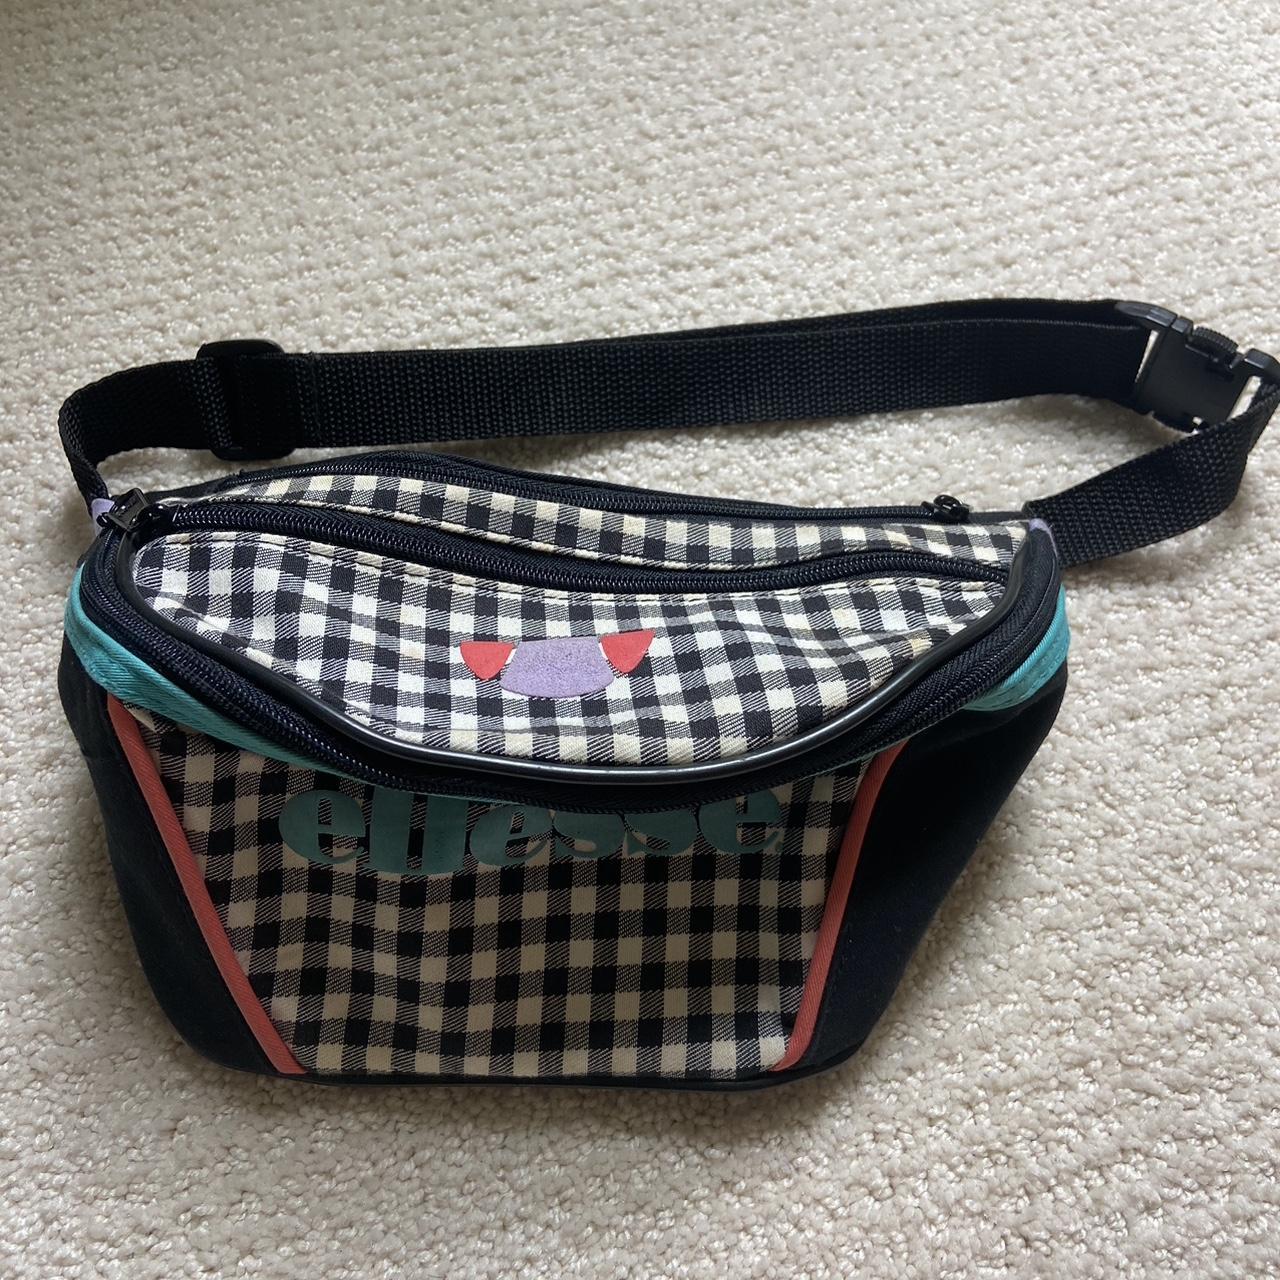 Grand Forge abstraktion Ellesse 80s style Fanny pack with white and black... - Depop